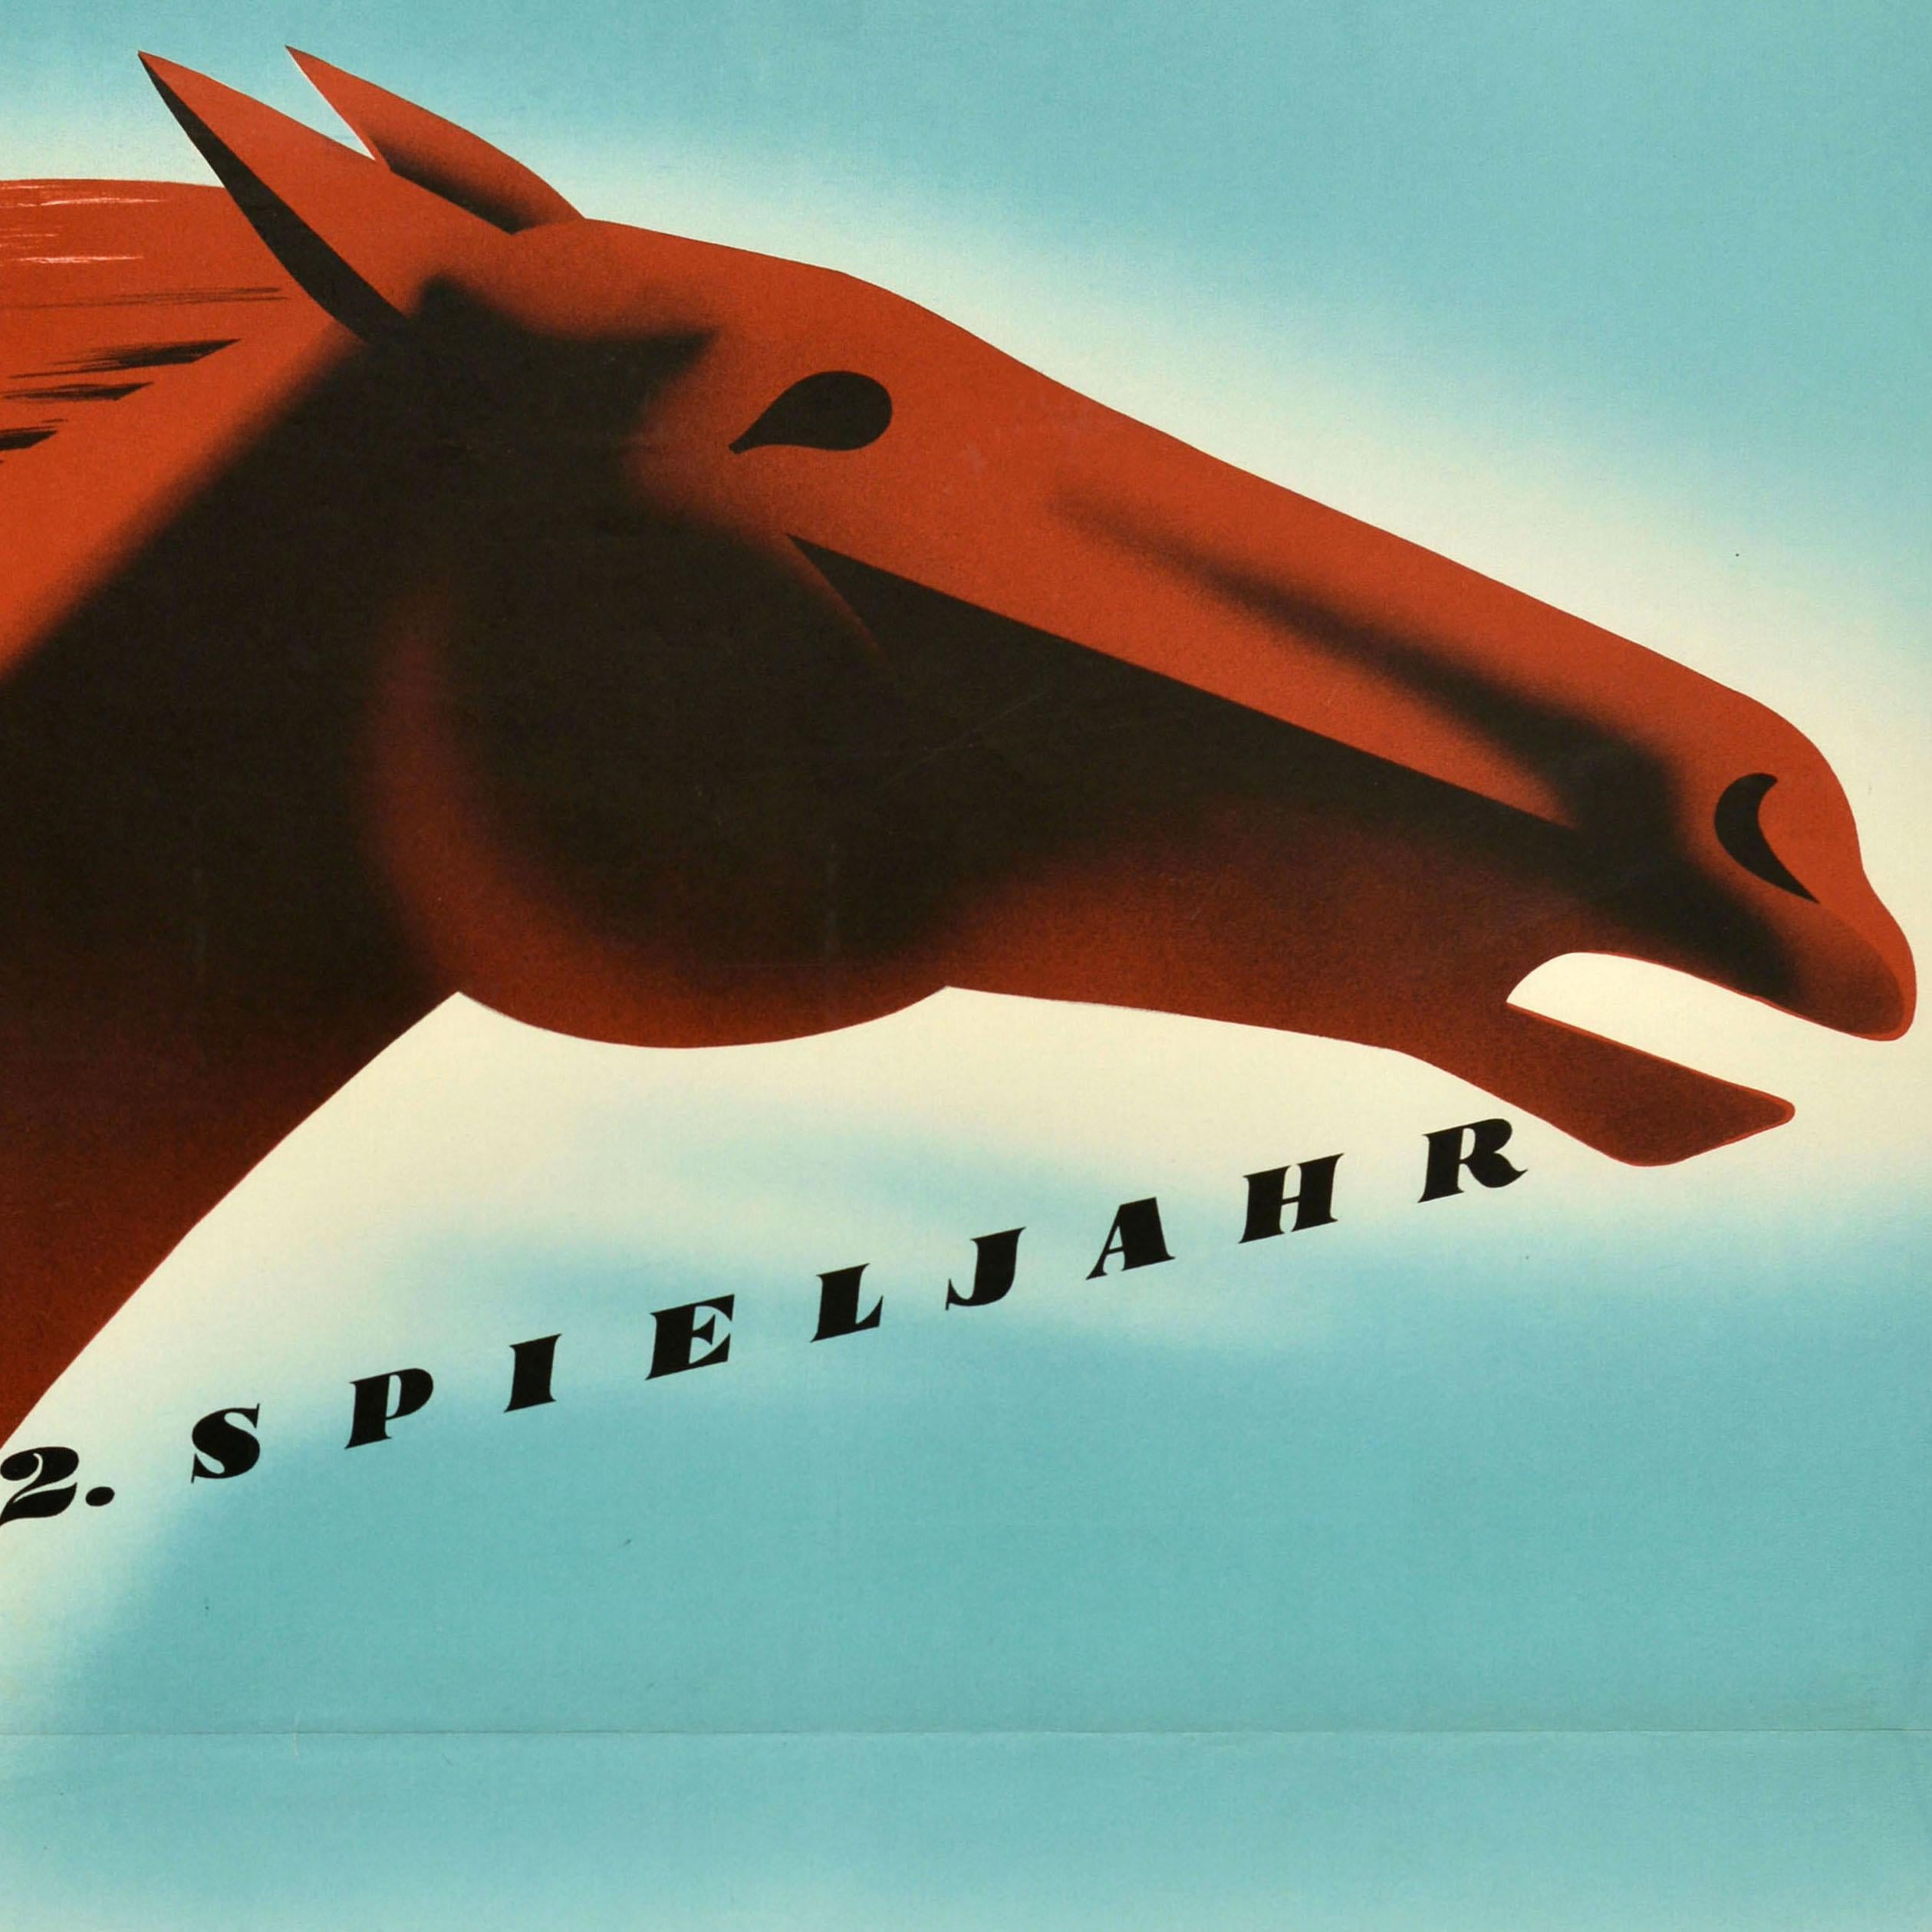 Original vintage horse racing poster for the 2nd Year of the Game Horse Pools / 2. Spieljahr Pferde Toto held on 3-4 April 1954 featuring a great image of a horse's head with its mane flowing back at speed on a blue and white background, the text